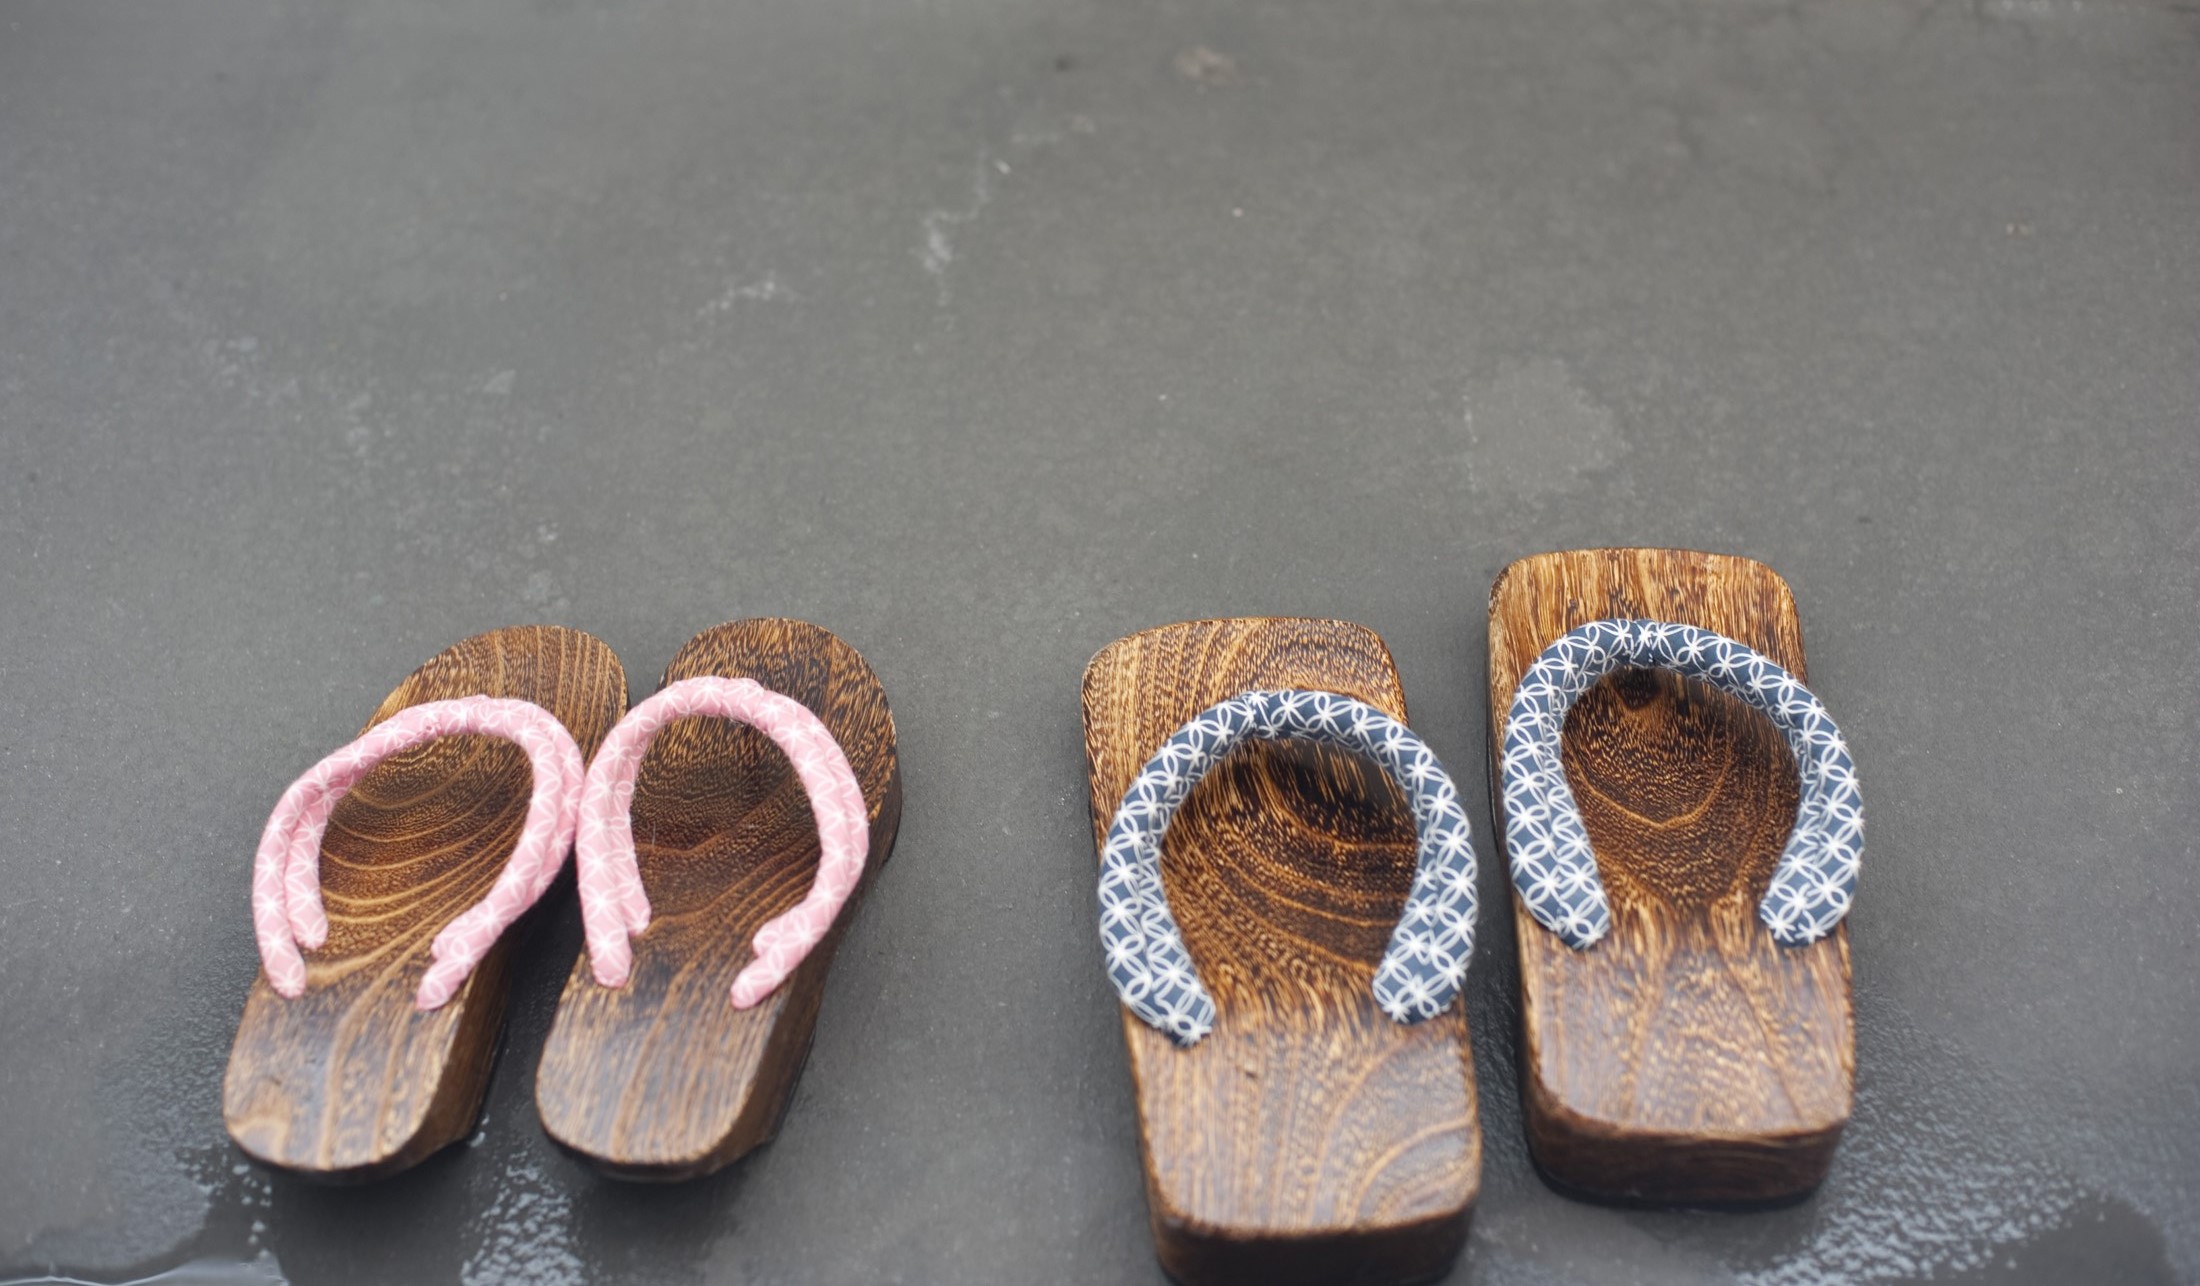 Discover more than 165 japanese style slippers best - esthdonghoadian